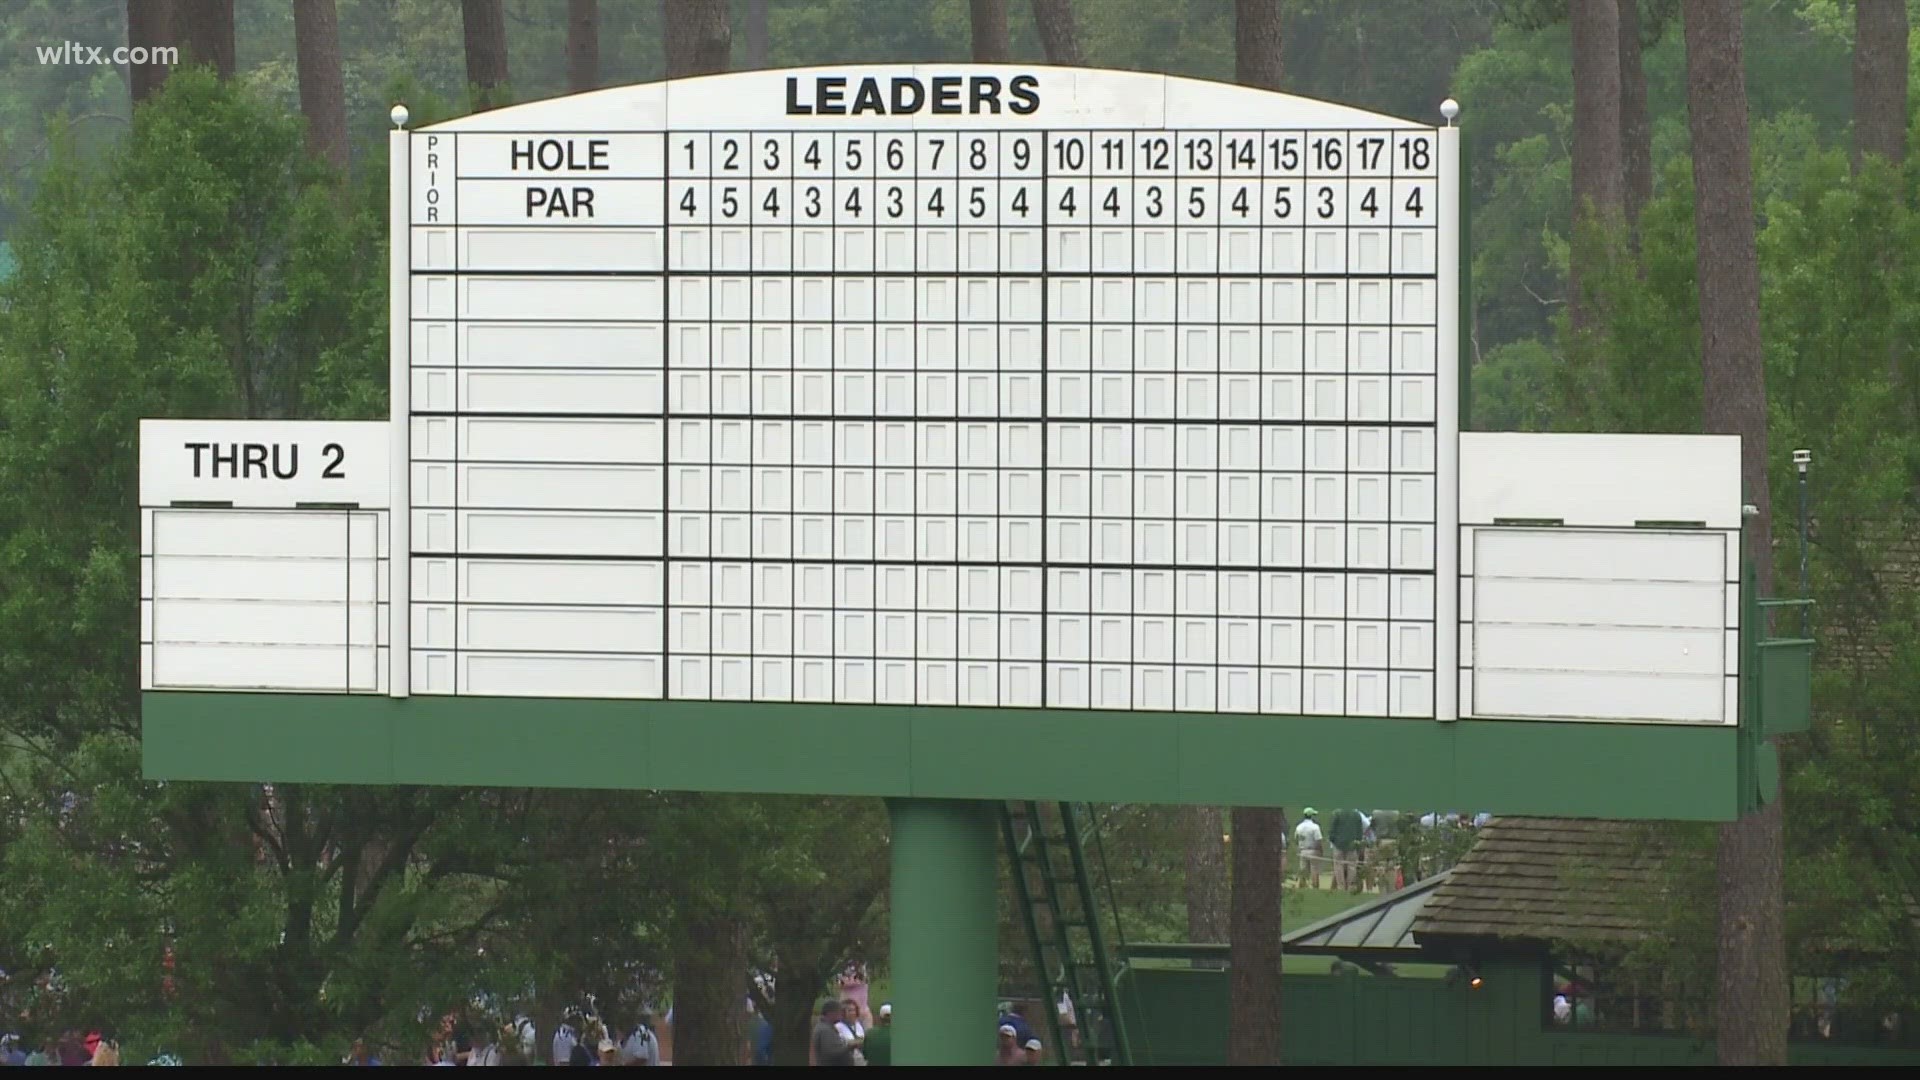 The Masters will keep score for fans the old fashioned way.